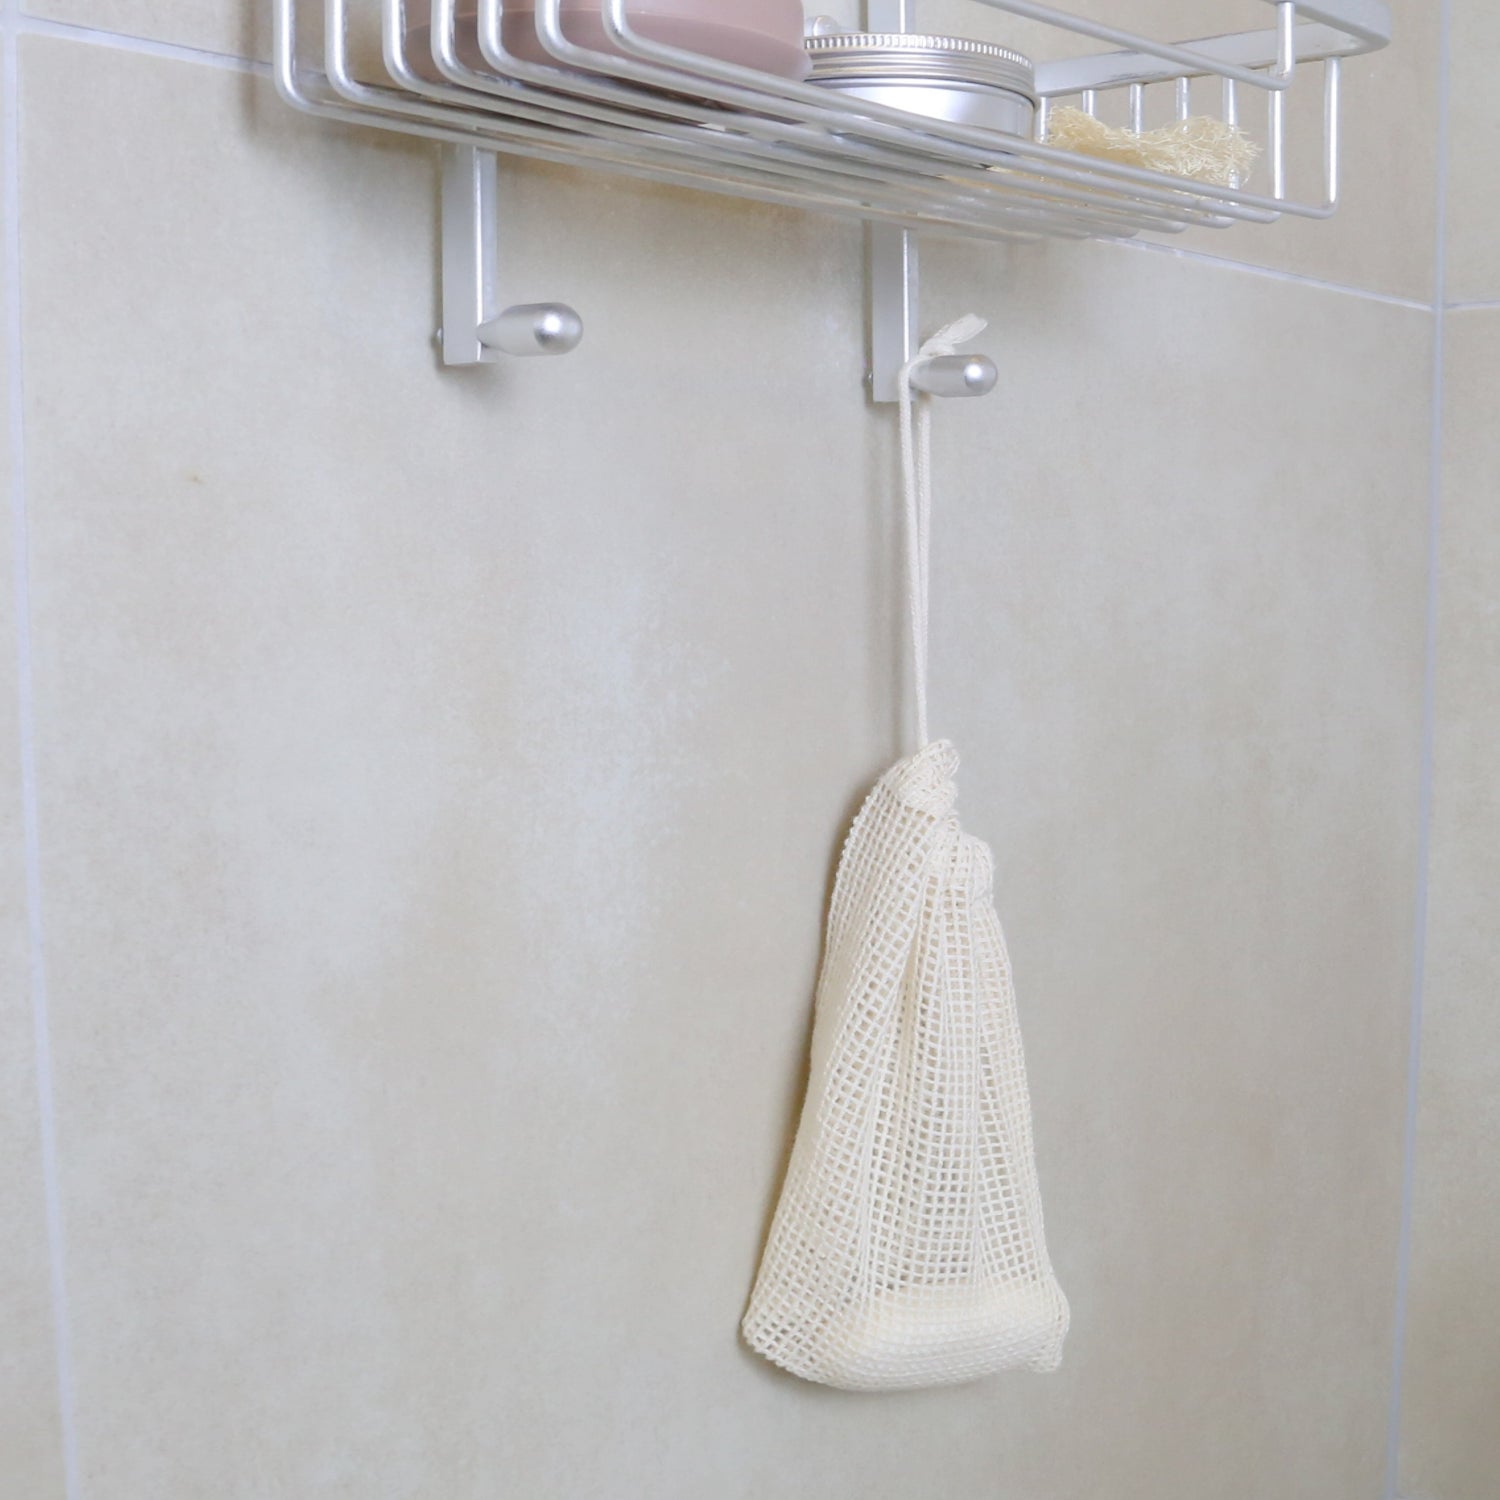 organic cotton mesh bag hanging in the shower with soap inside